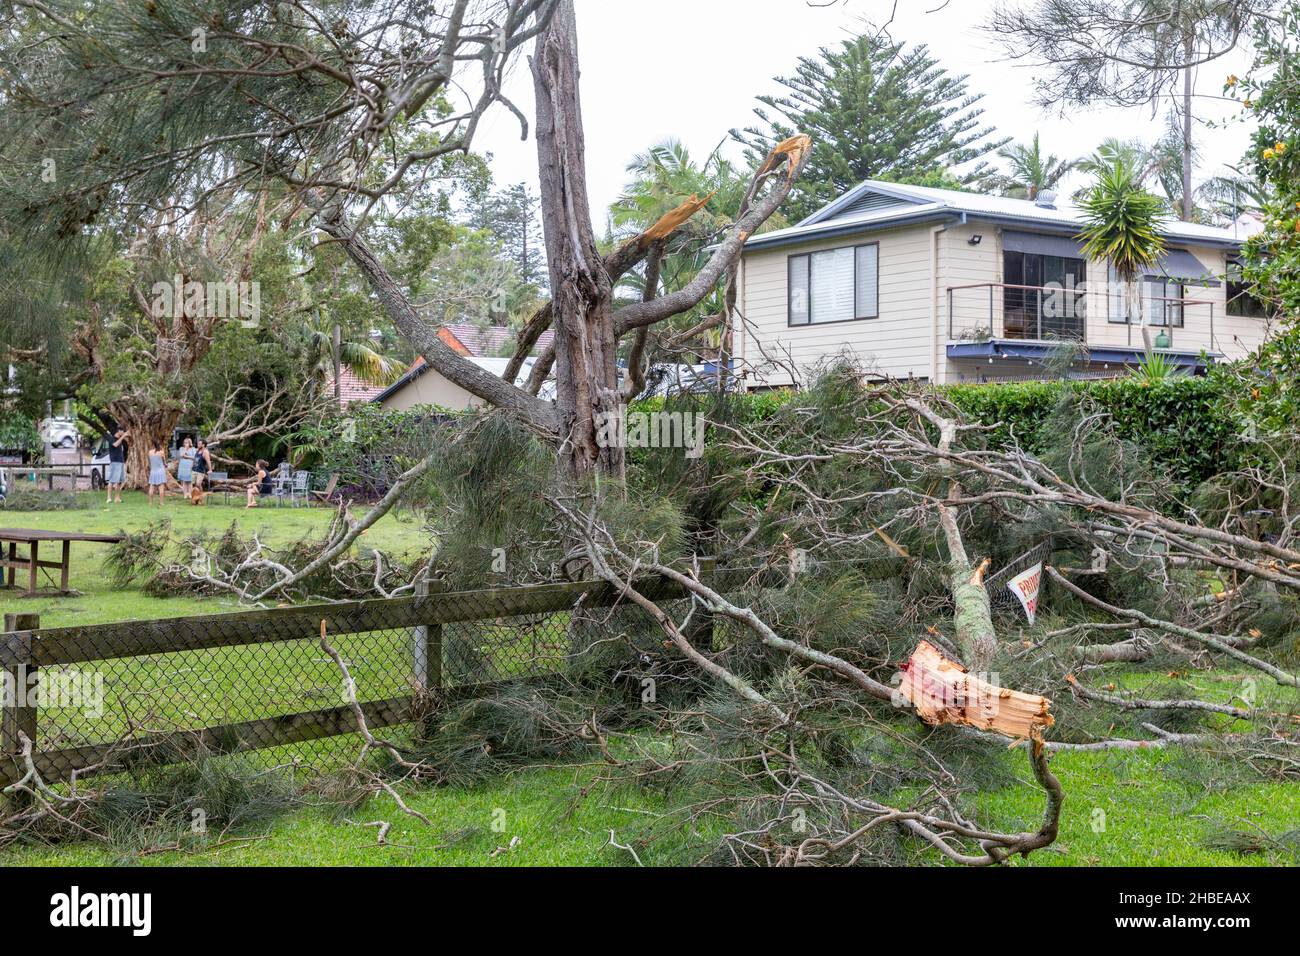 Sydney northern beaches hit by freak storm, power lines down, trees down, one fatality, trees around Narrabeen Lake uprooted,Narrabeen area,Australia Stock Photo